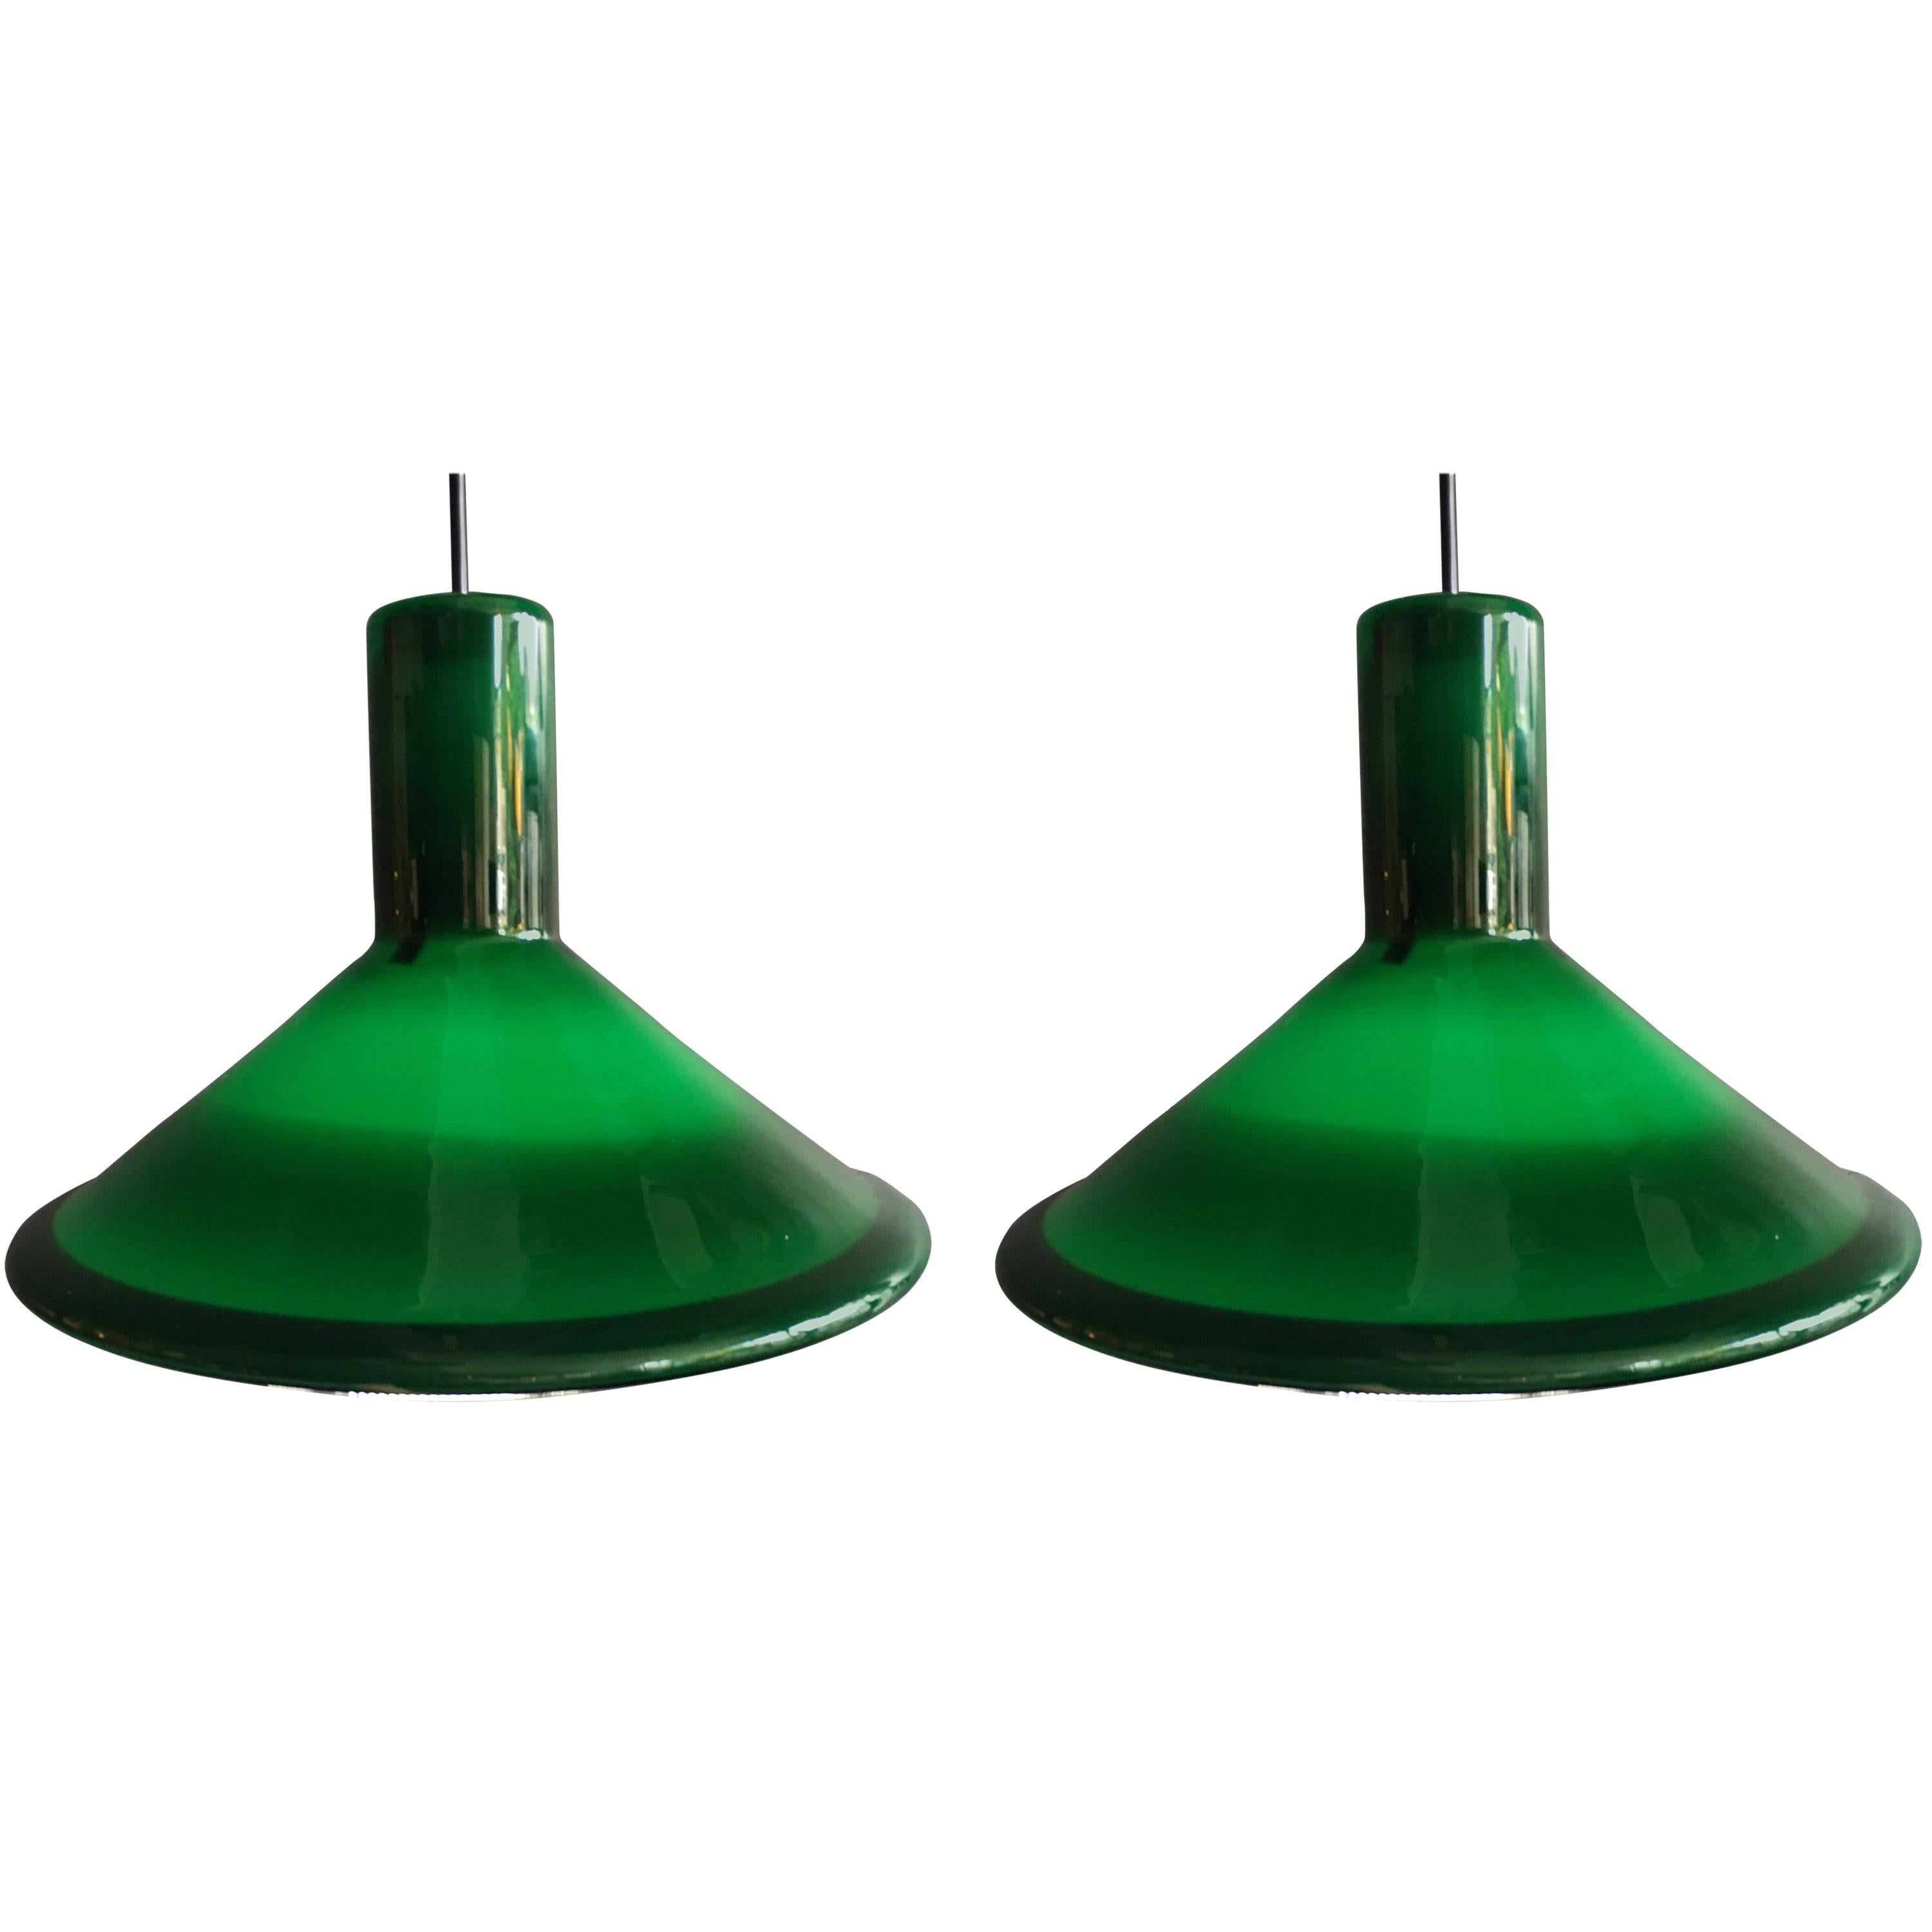 Pair of Danish Midcentury Pendant Lights by Michael Bang for Holmegaard.